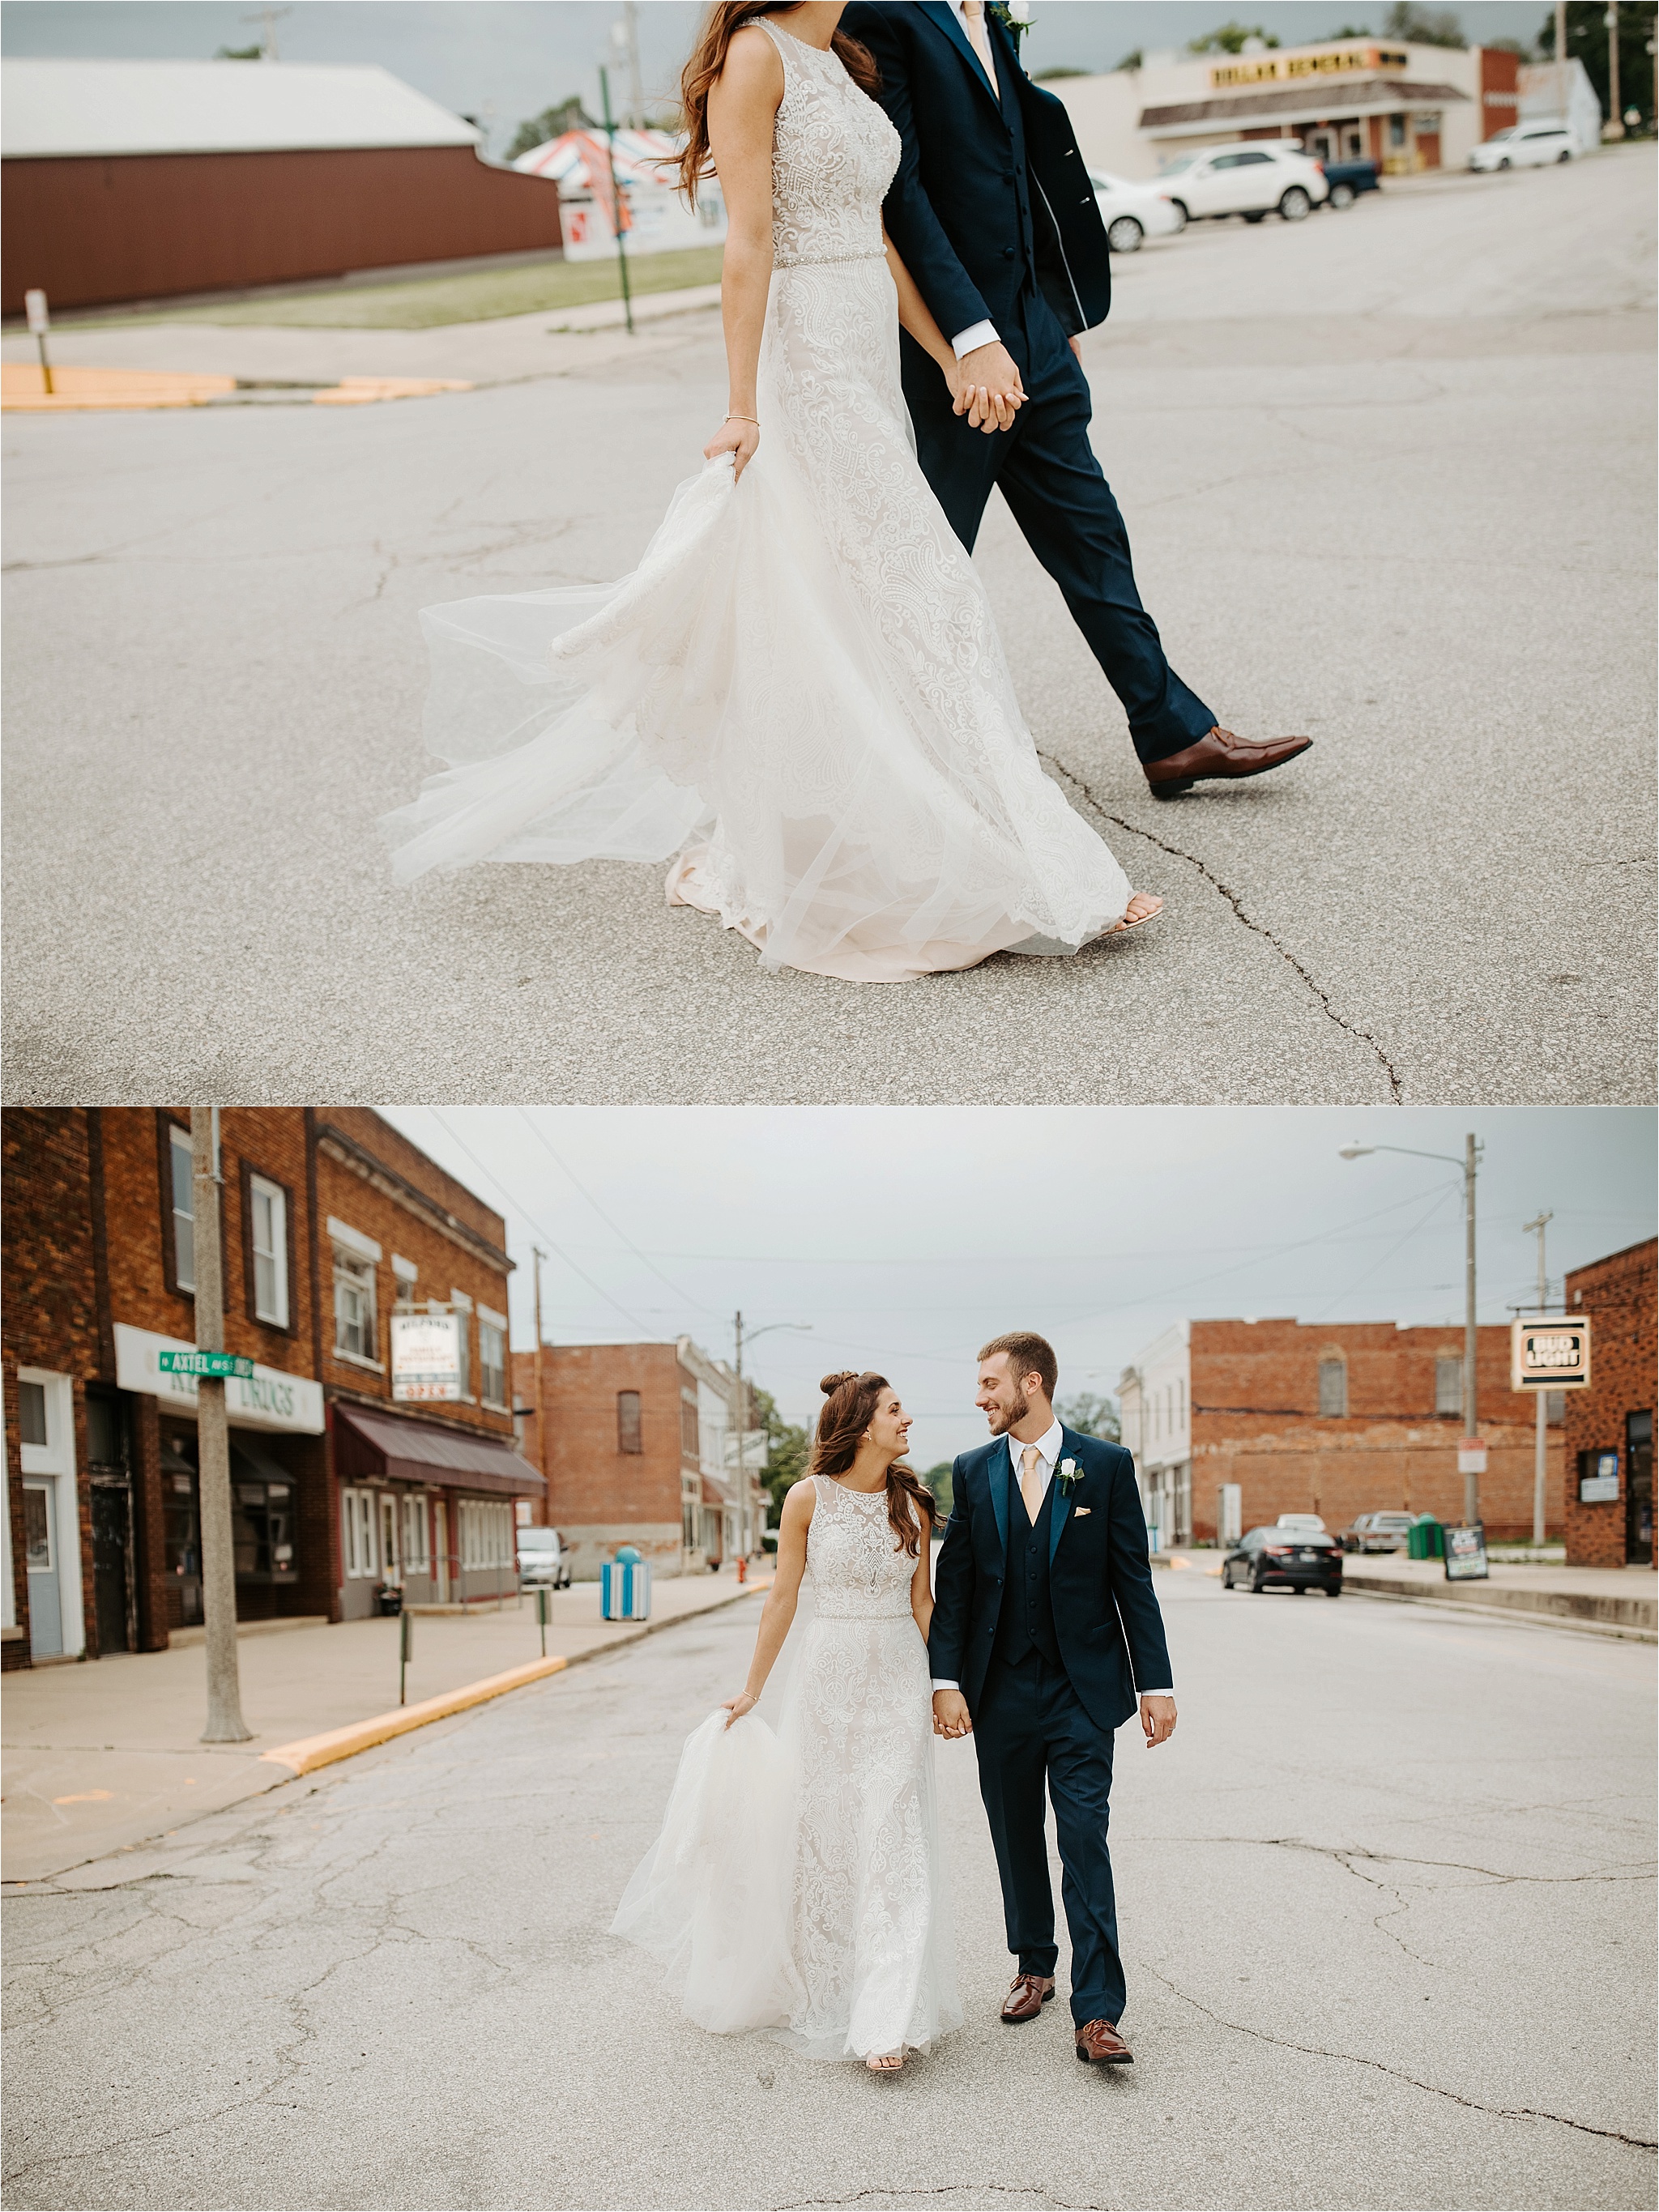 Bride and Groom photos at Town & Country Events in Milford, IL. Krystal Richmond Photography